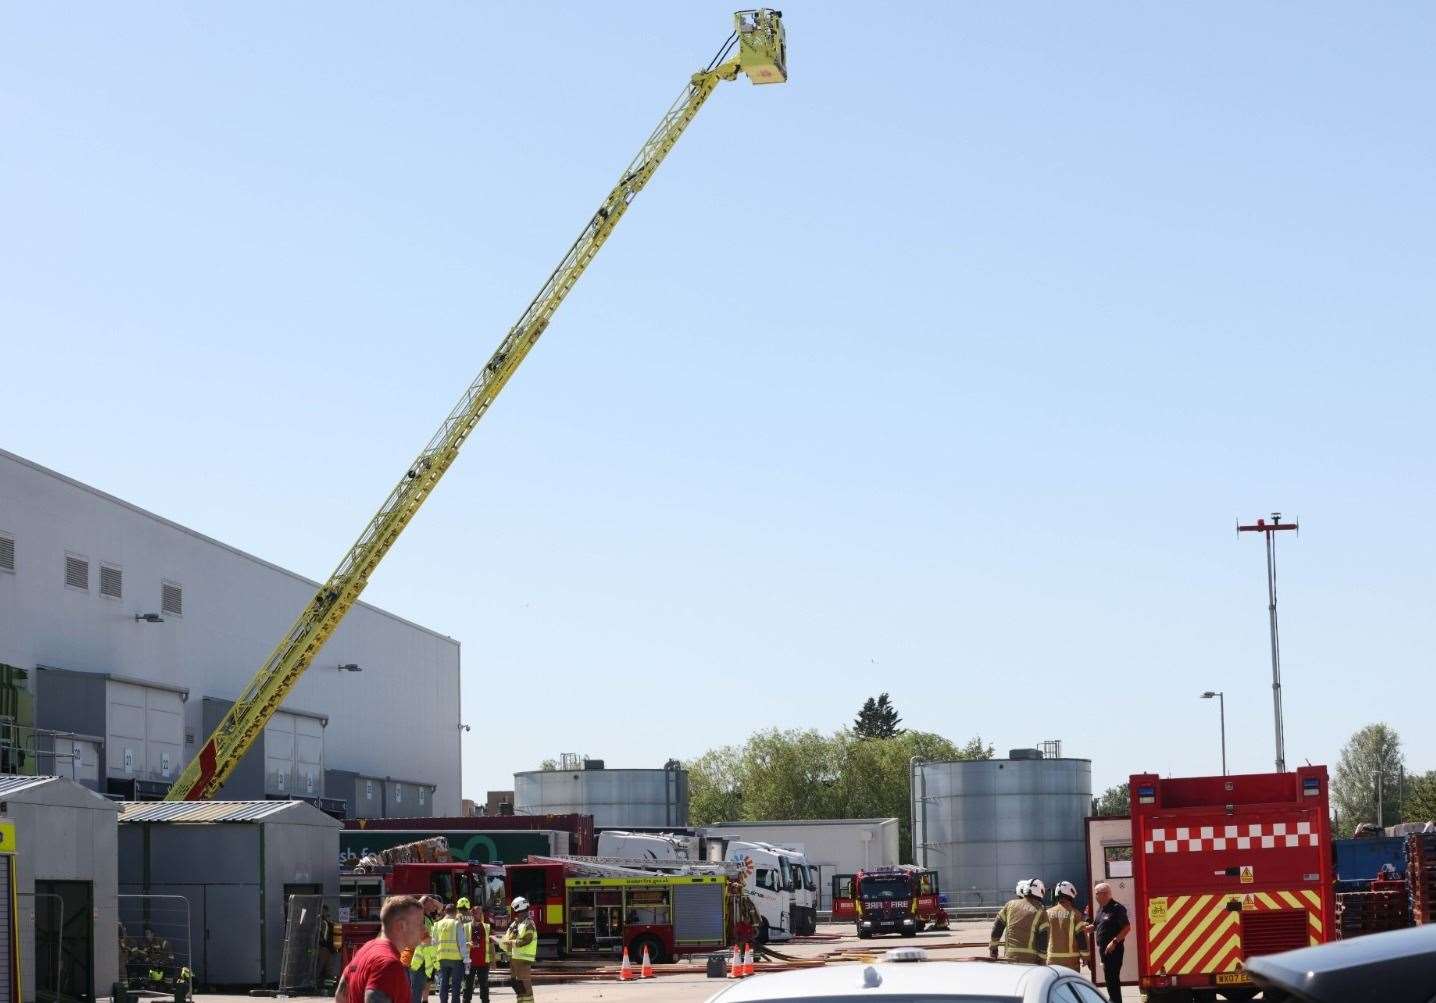 A crane is being use by firefighters at the scene. Photo: UKNIP